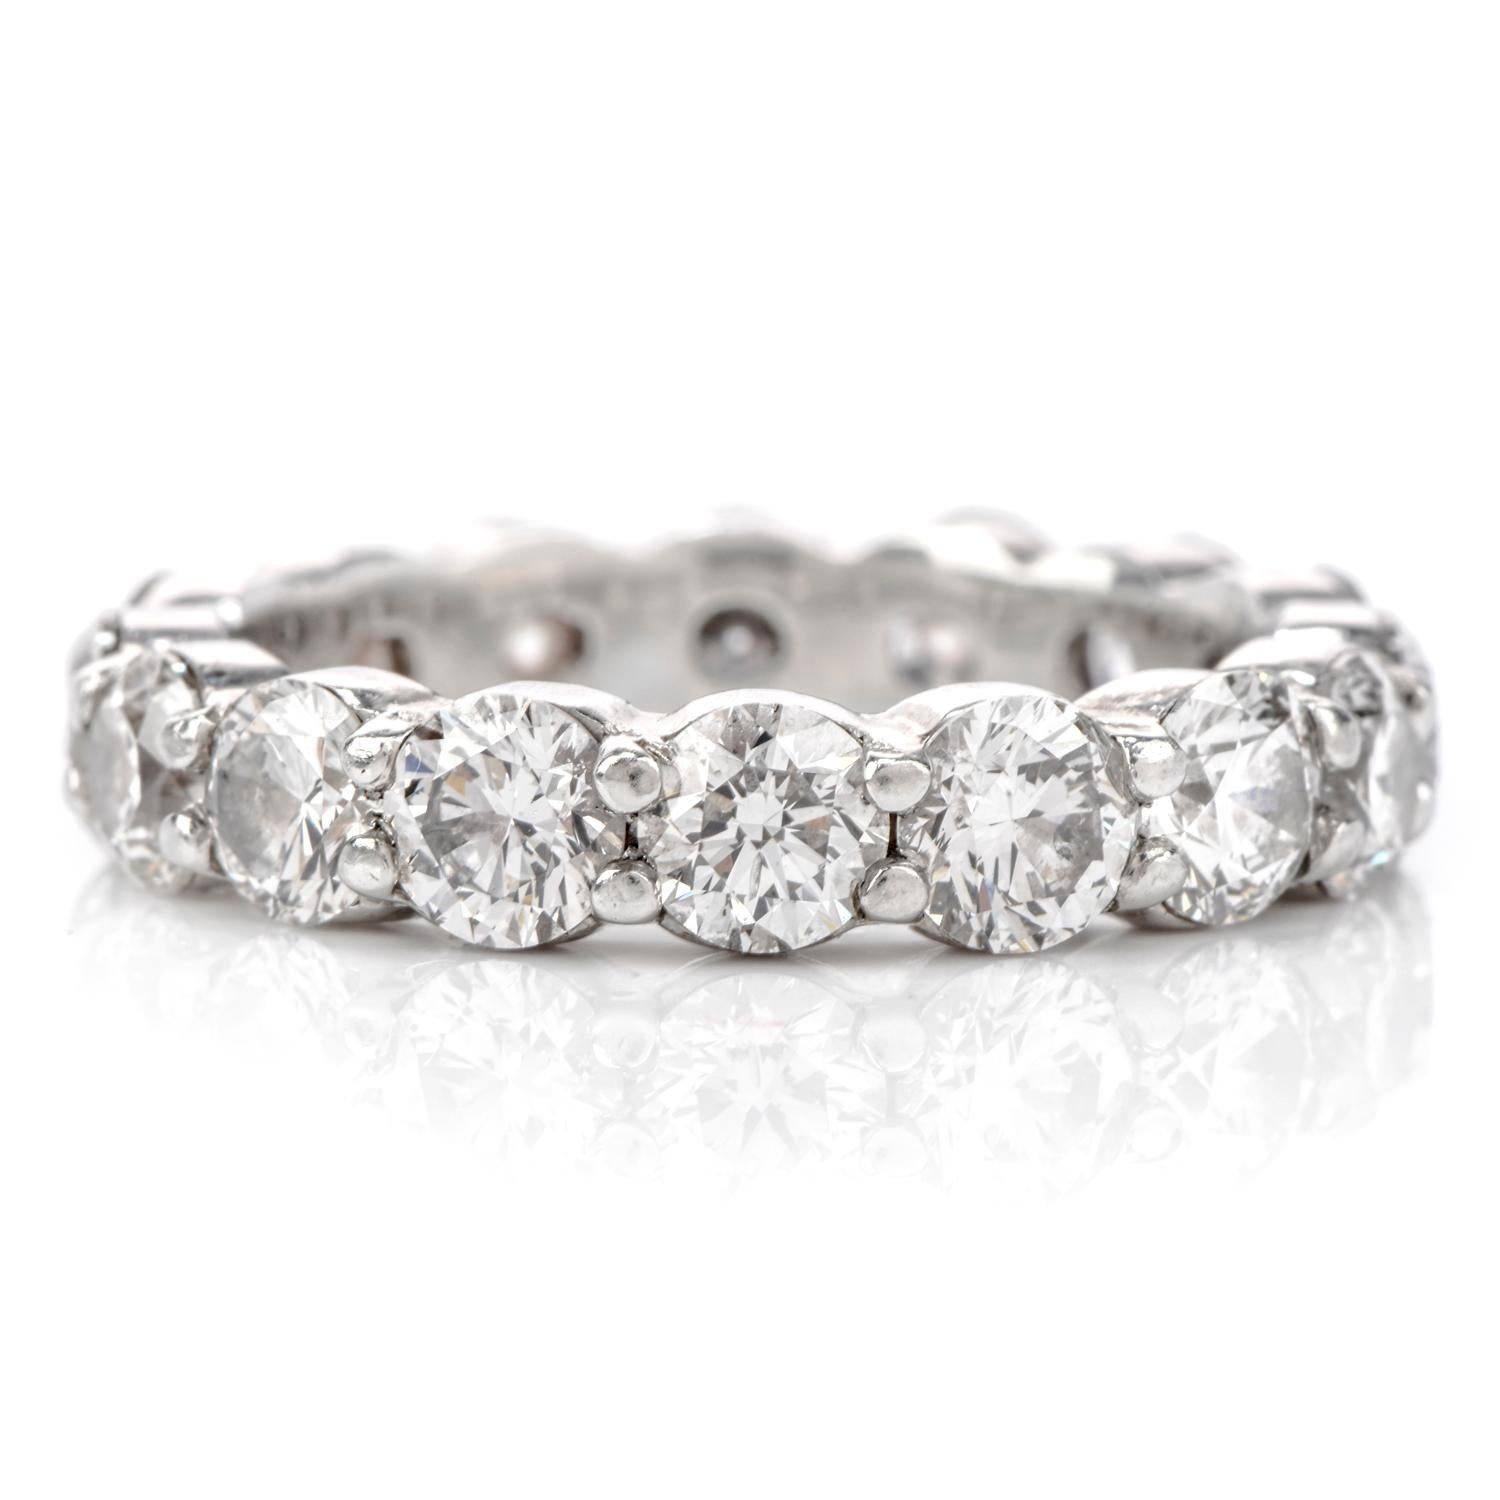 The best aspect about eternity bands is that you are able to see diamonds sparkle at every angle when you wear them!

 Also, they go with almost any attire, dress up engagement rings, or can be worn simply by themselves.  Experience the ravishing